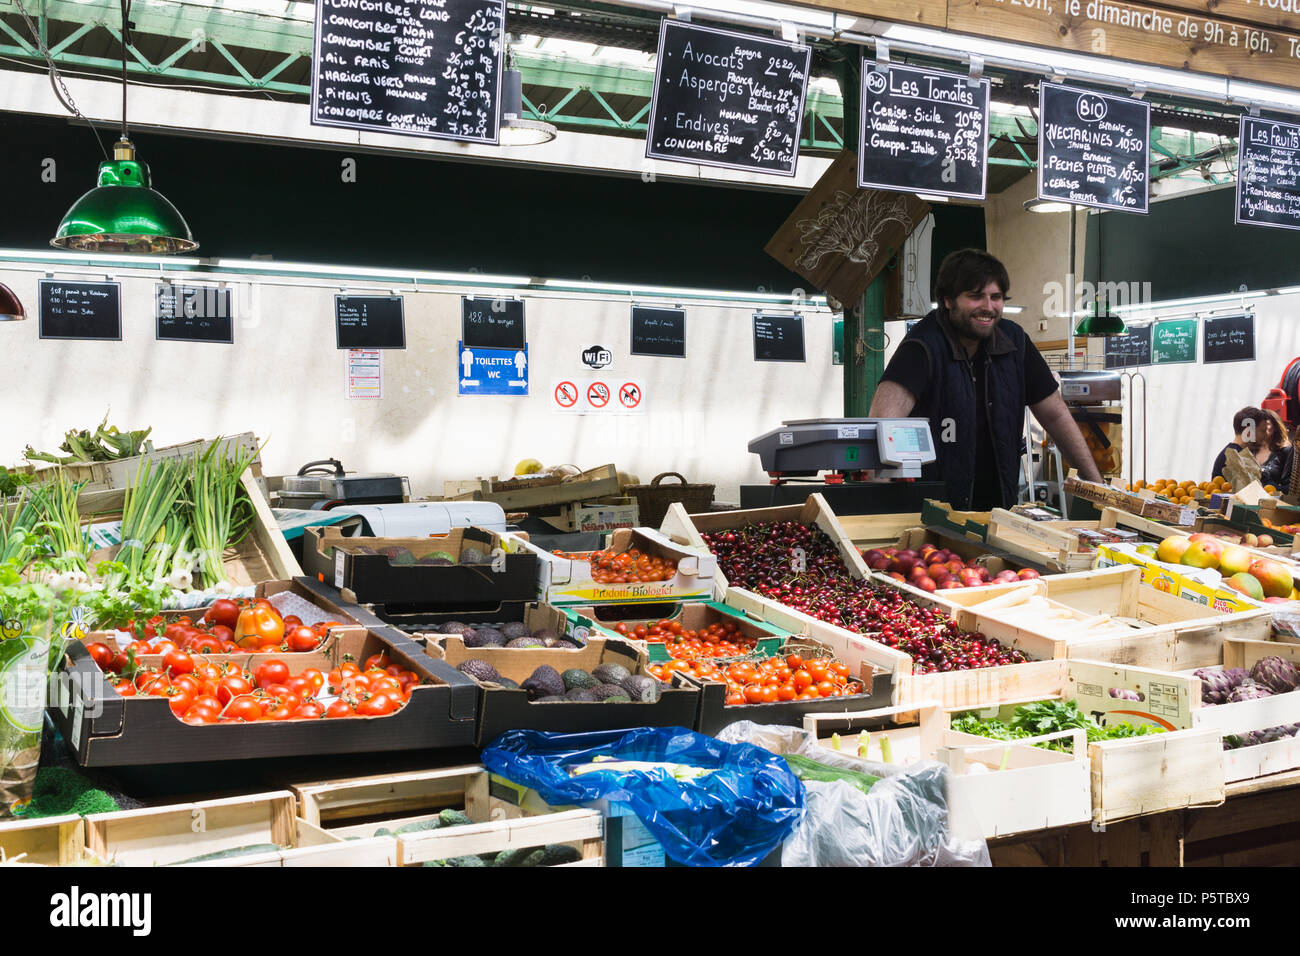 Fresh products on sale at the Enfants Rouges market in Paris, France. Stock Photo